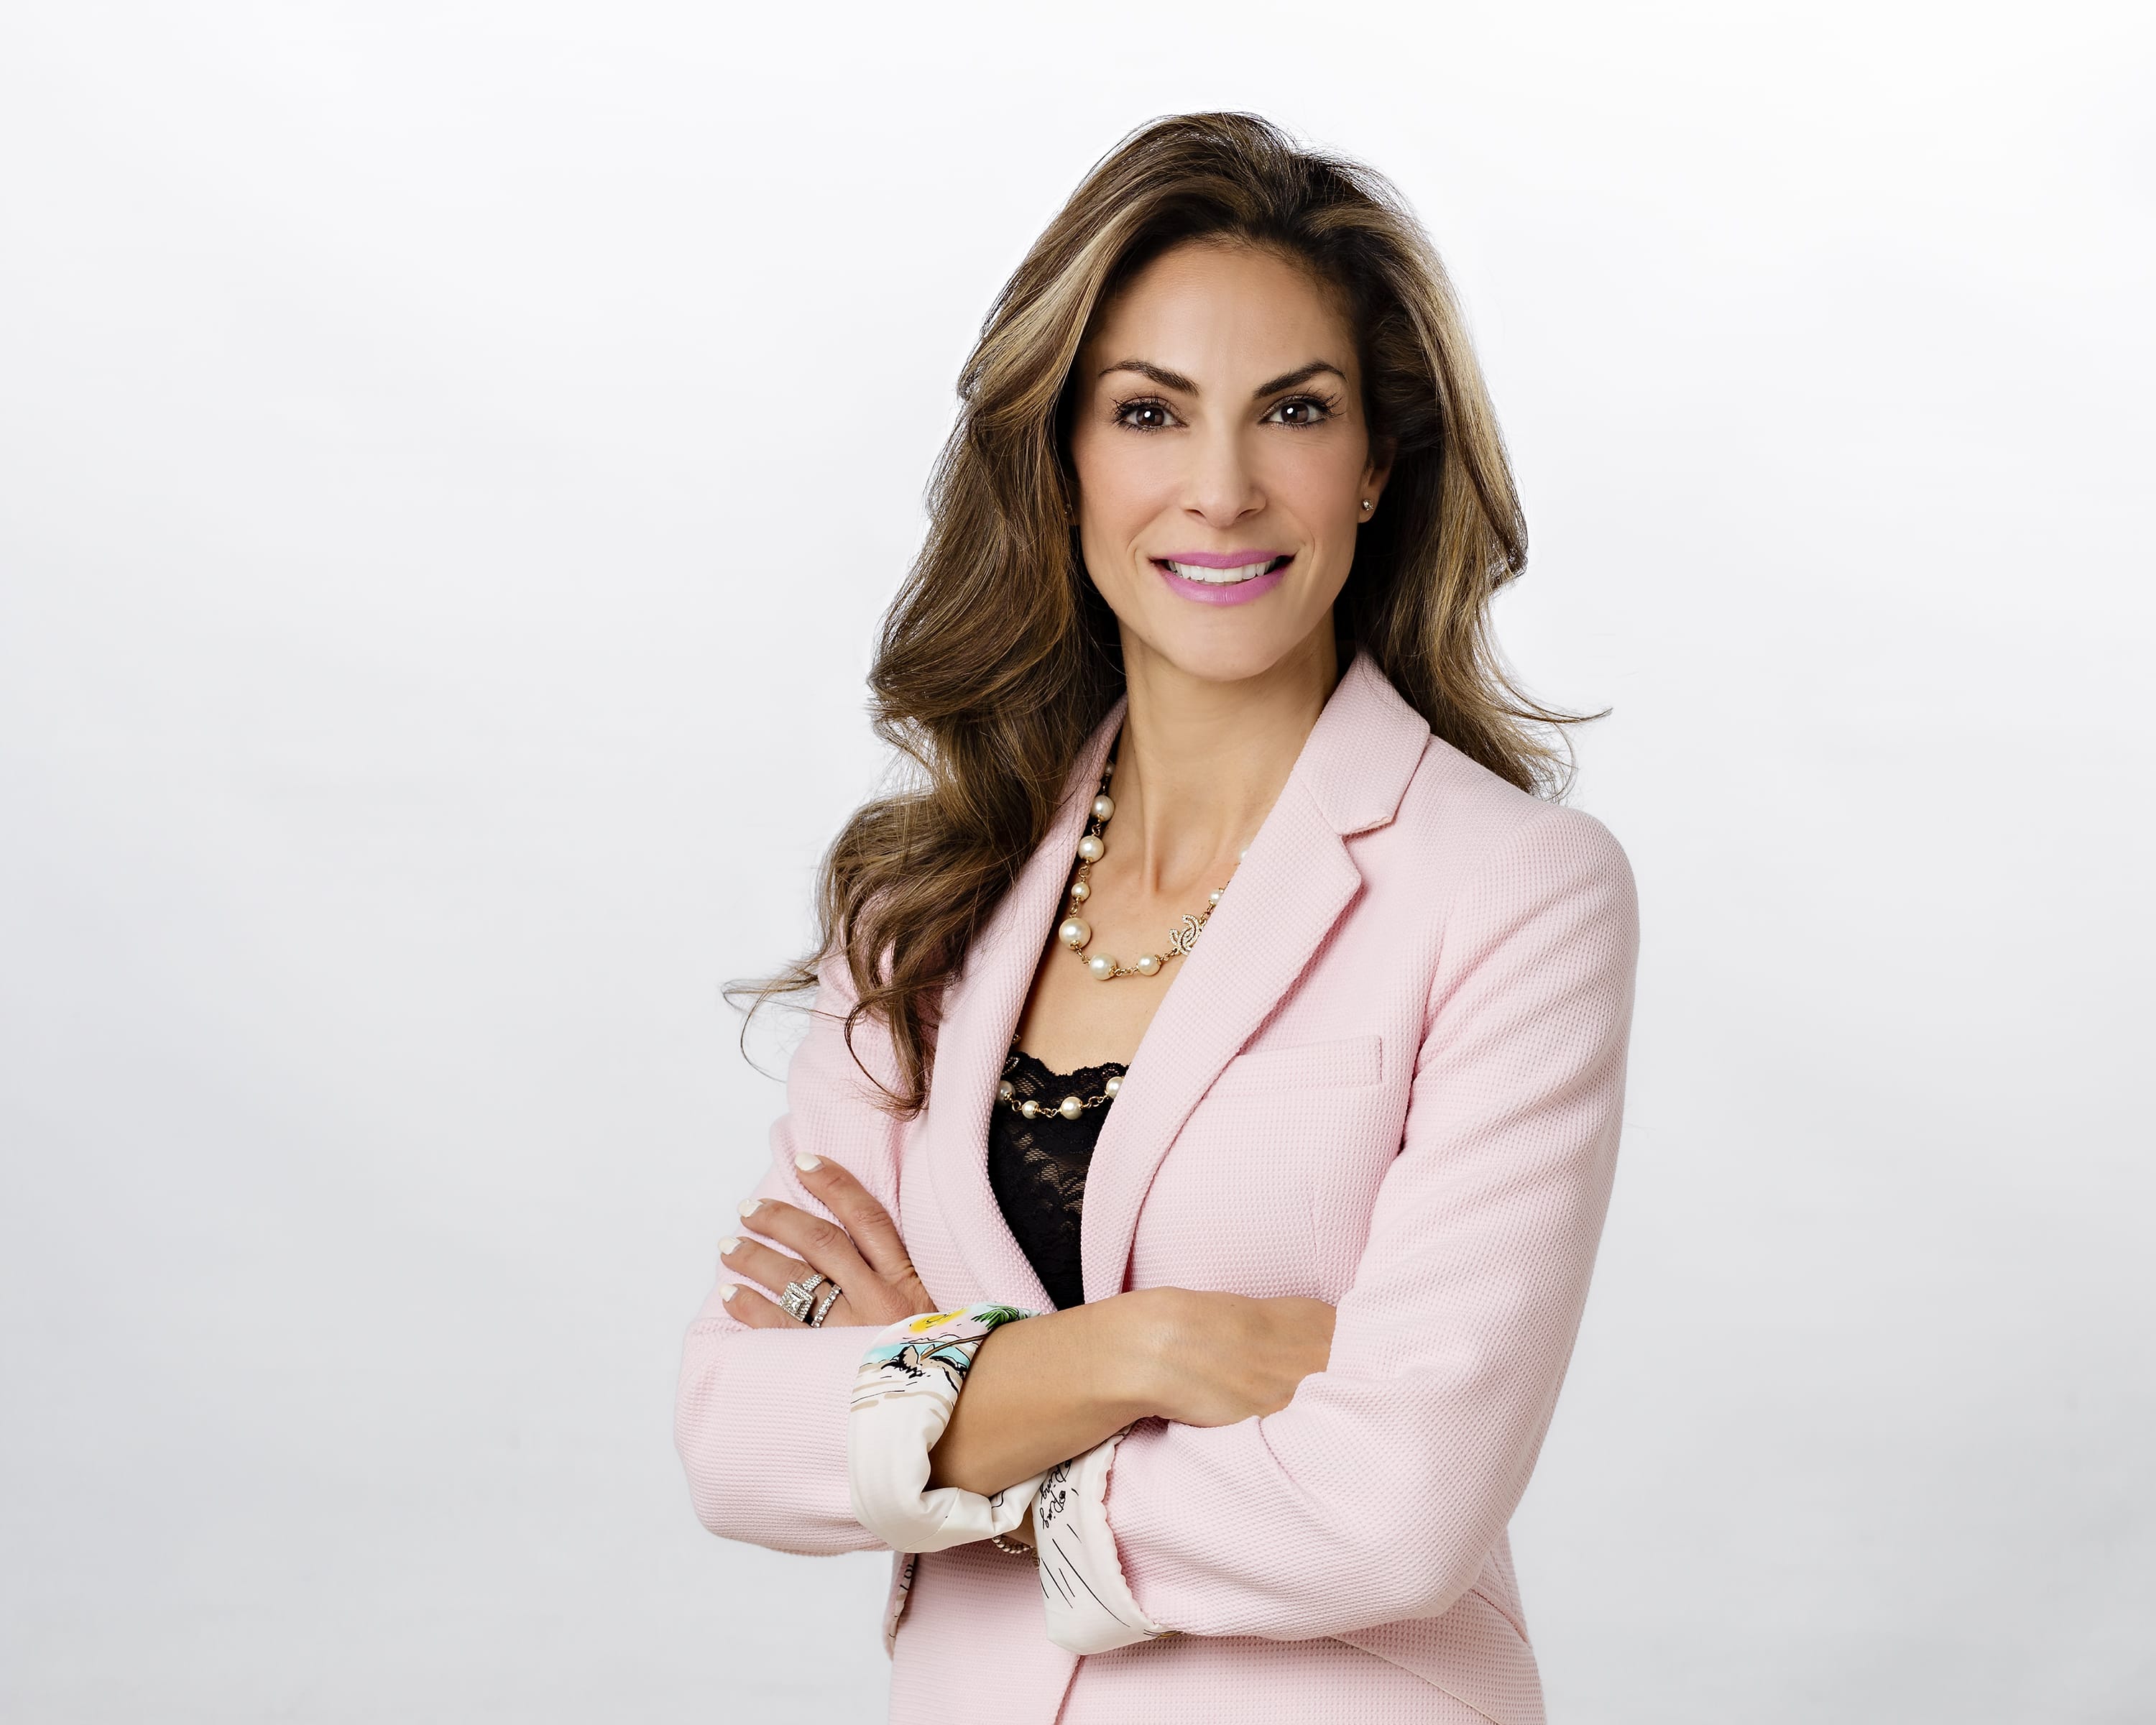 Winner of First Team’s highest honor for 2018, the Founders Award, real estate agent Meital Taub used her coastal luxury expertise to quickly sell a multi-million-dollar estate that was donated to Big Brothers Big Sisters, in addition to her own commission. 